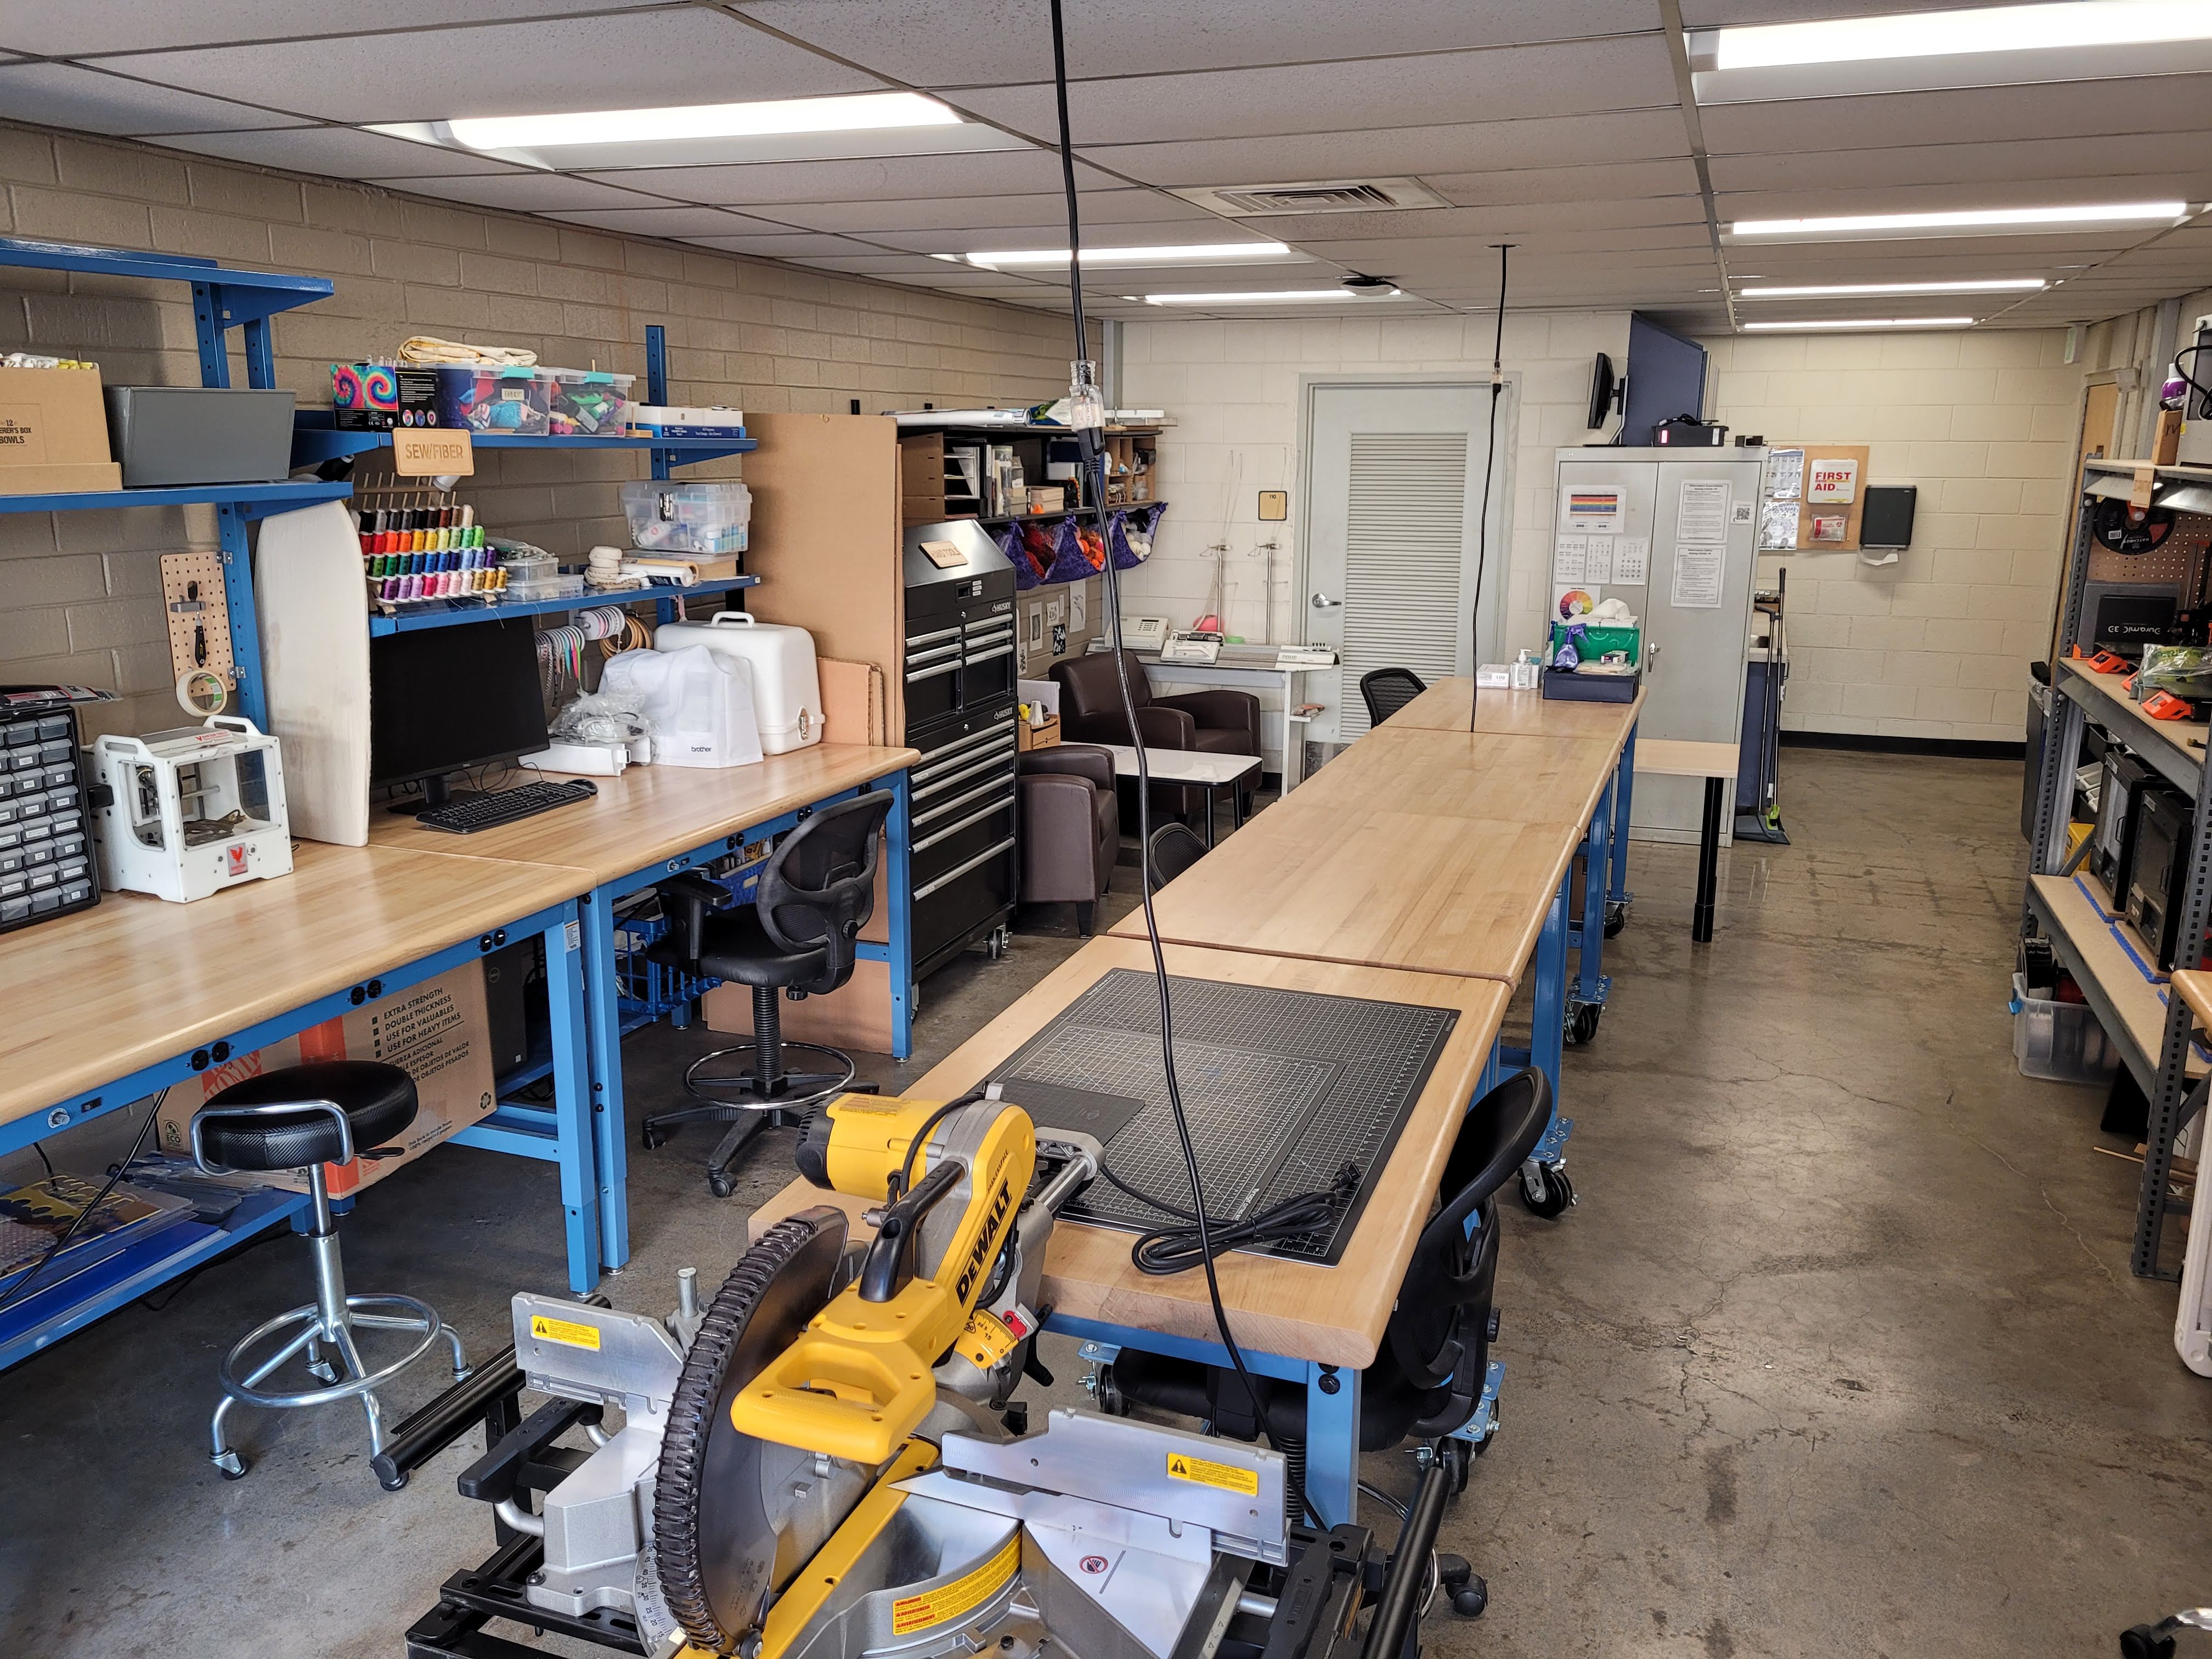 view of the Makerspace